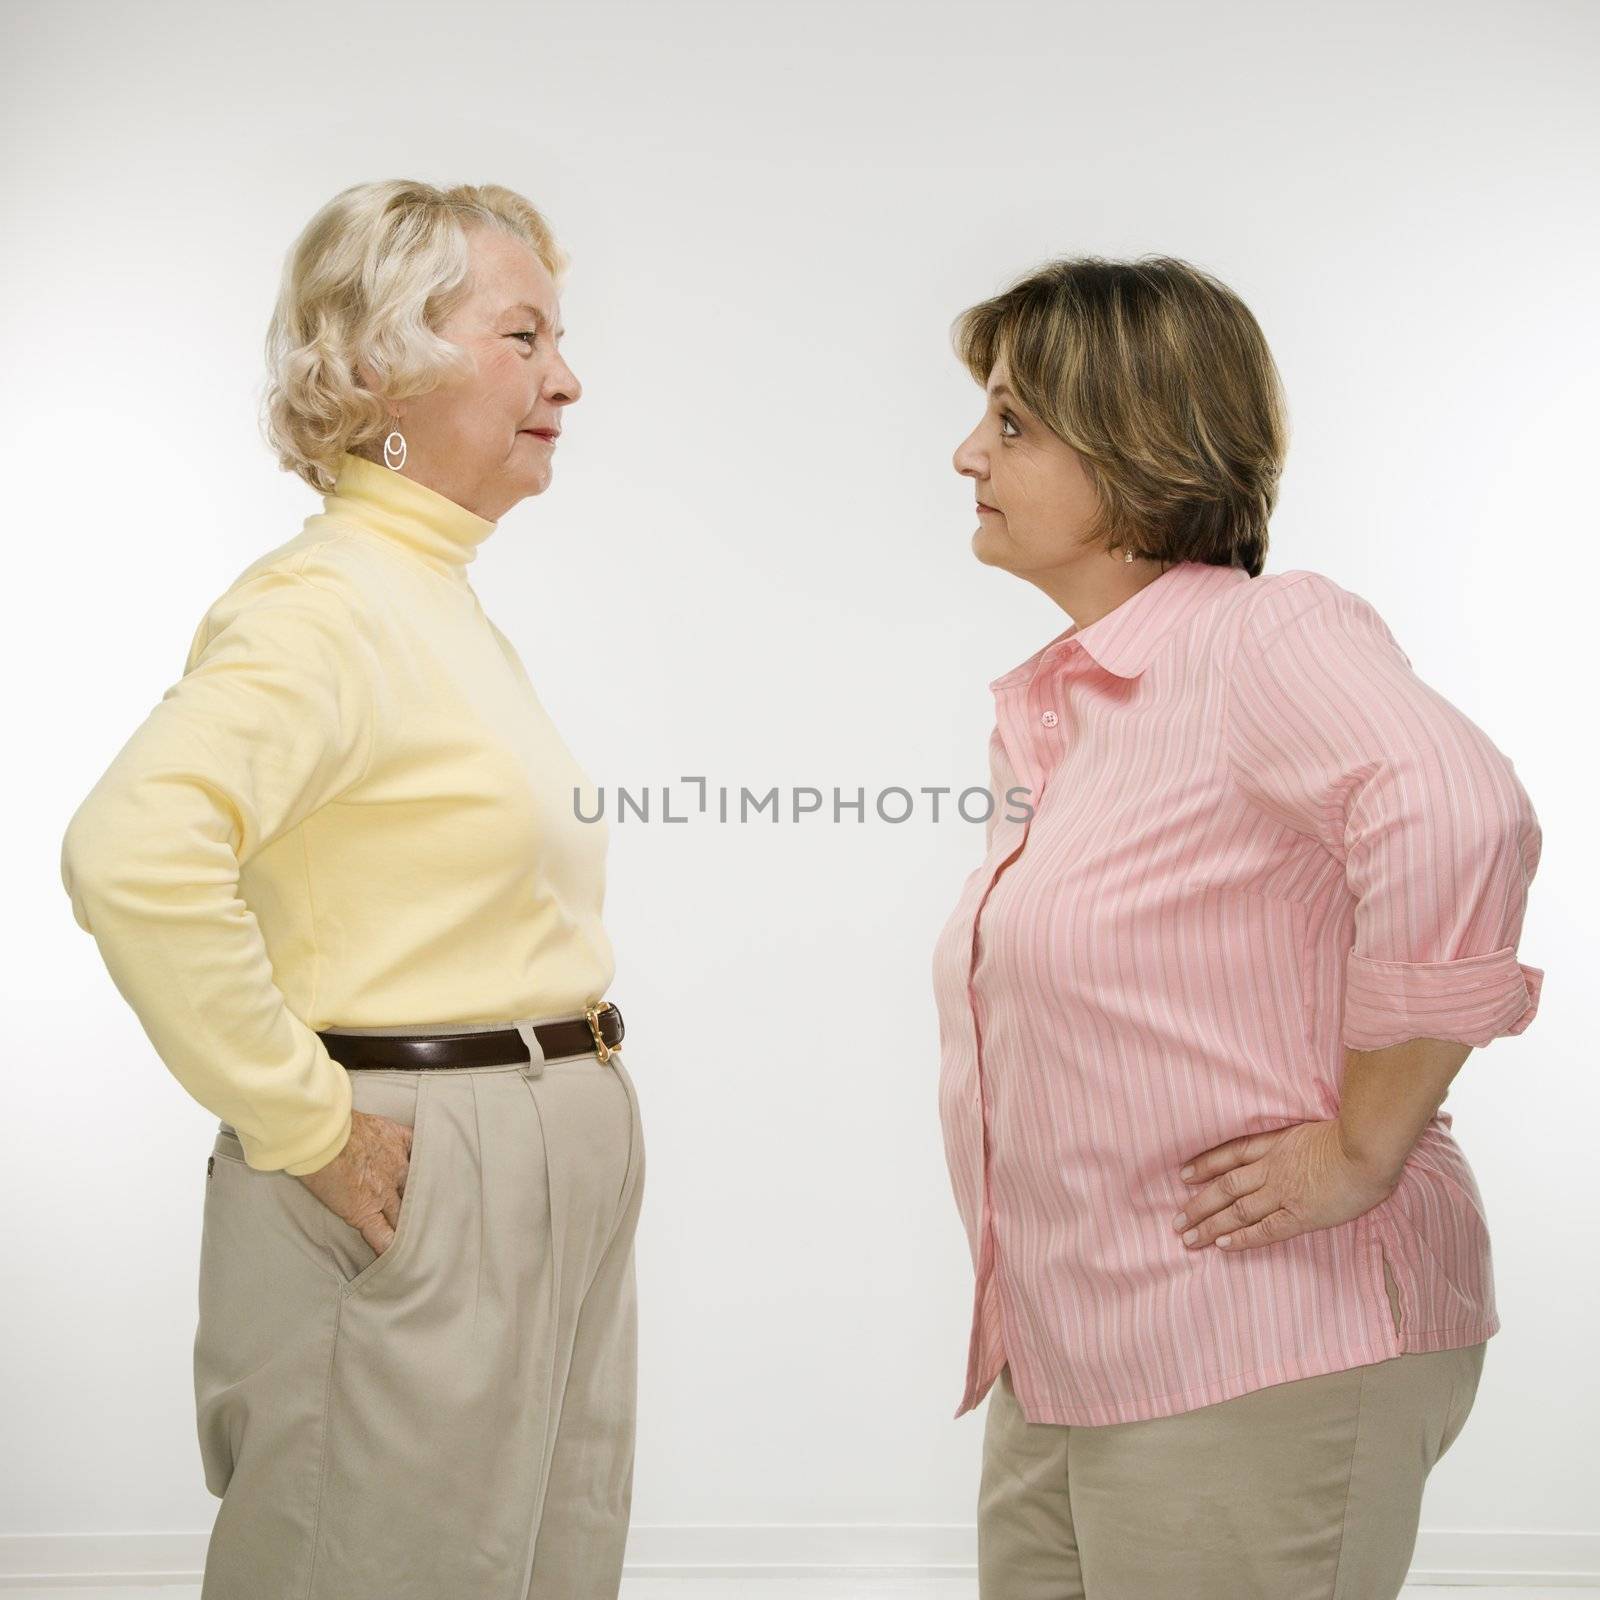 Caucasian senior woman and middle aged woman face to face arguing.